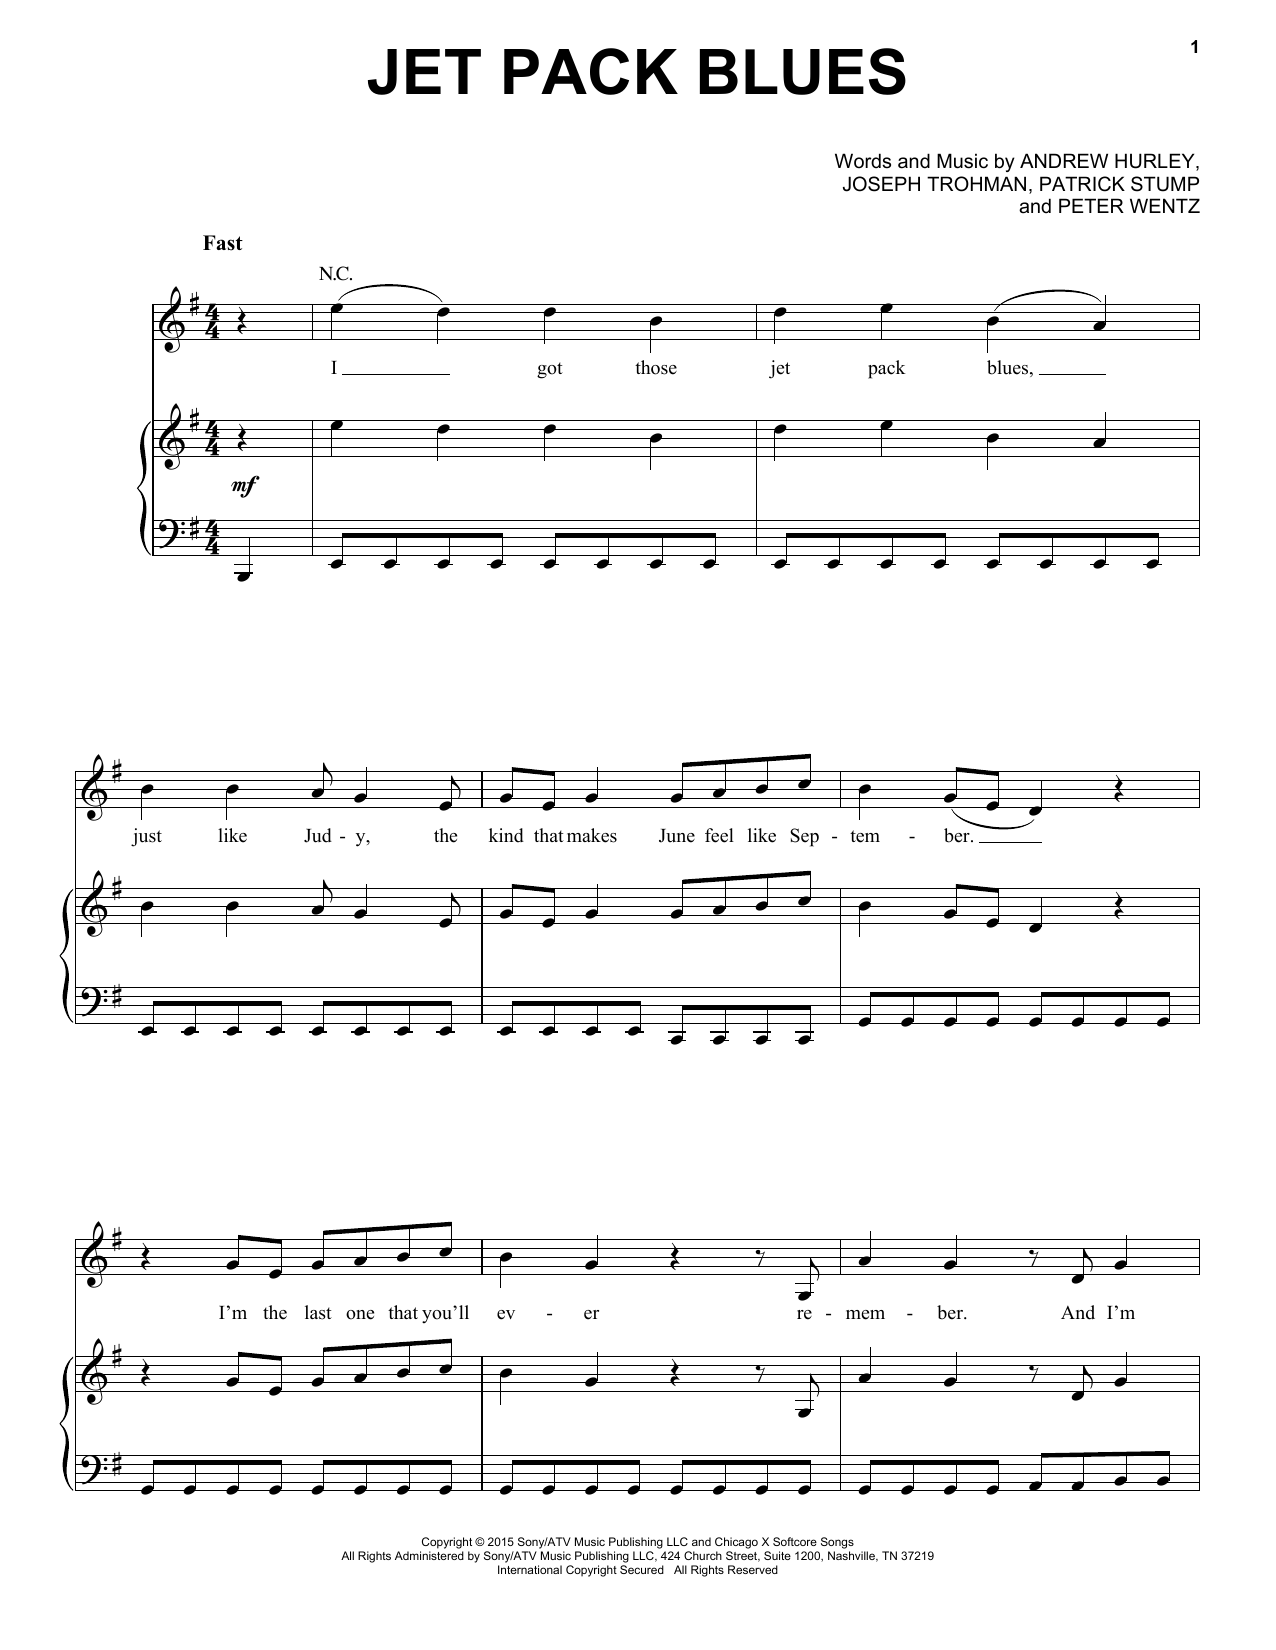 Download Fall Out Boy Jet Pack Blues Sheet Music